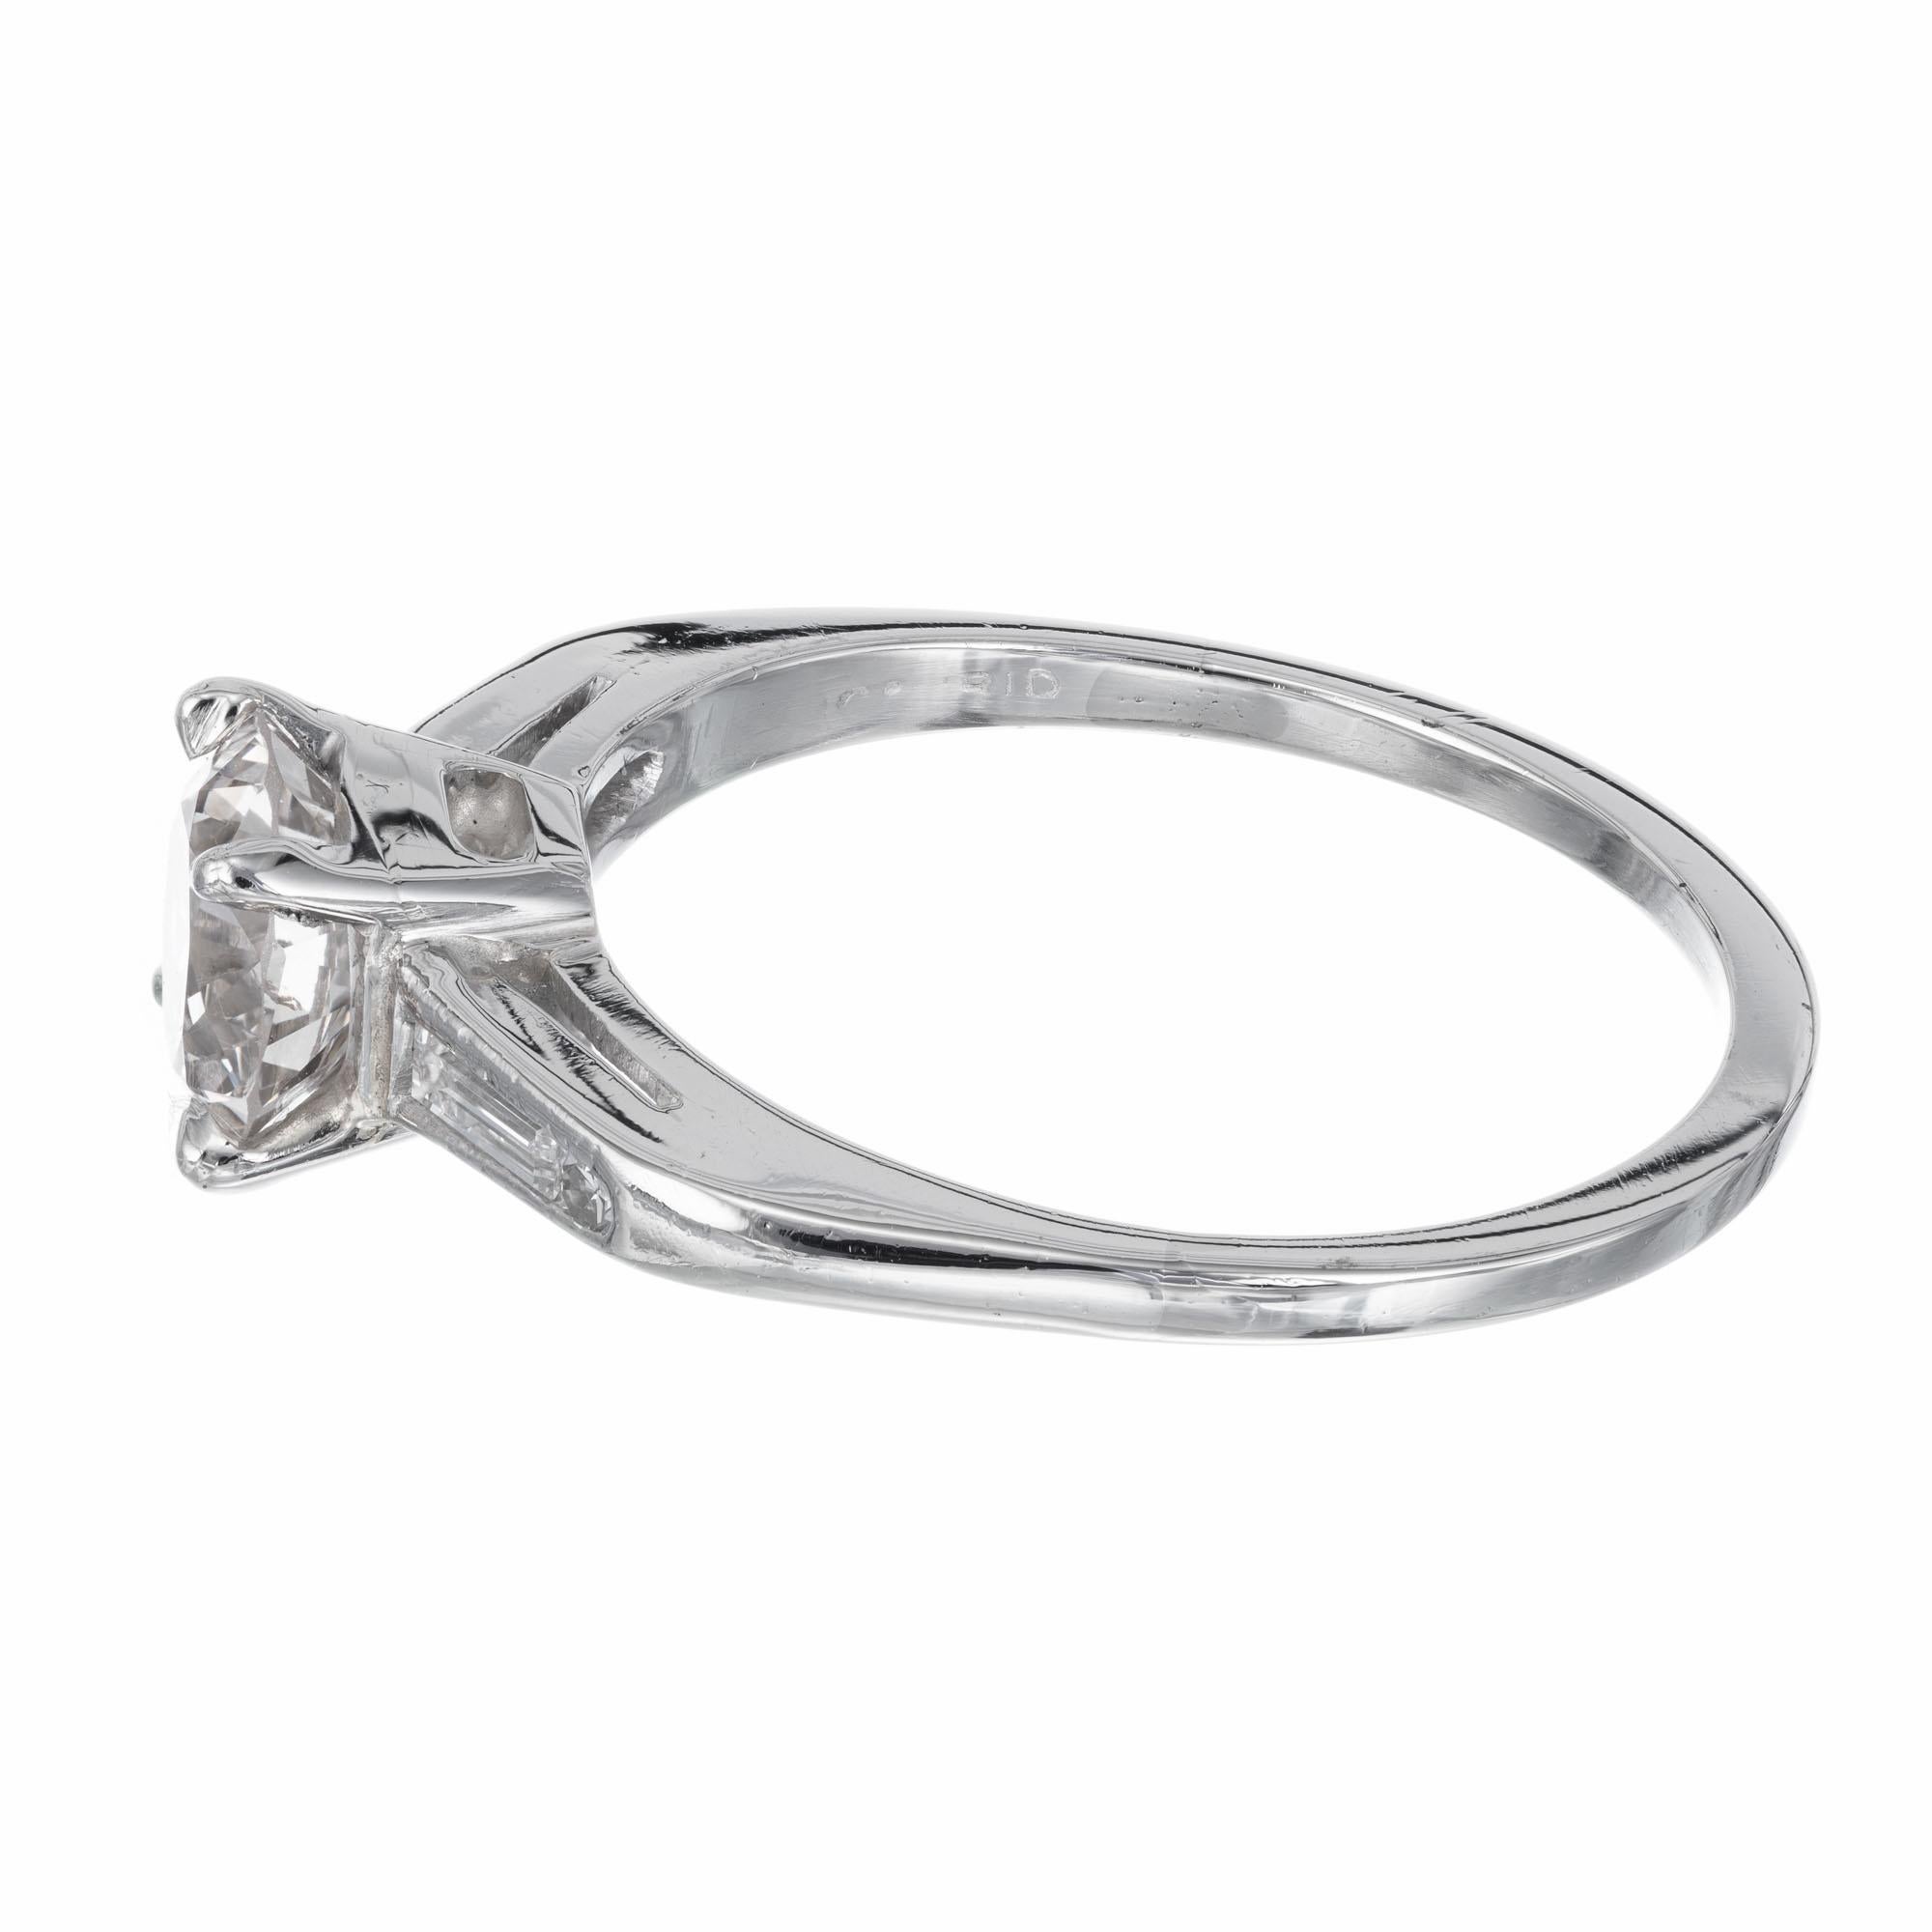 GIA Certified 1.11 Carat Diamond Platinum Engagement Ring In Excellent Condition For Sale In Stamford, CT